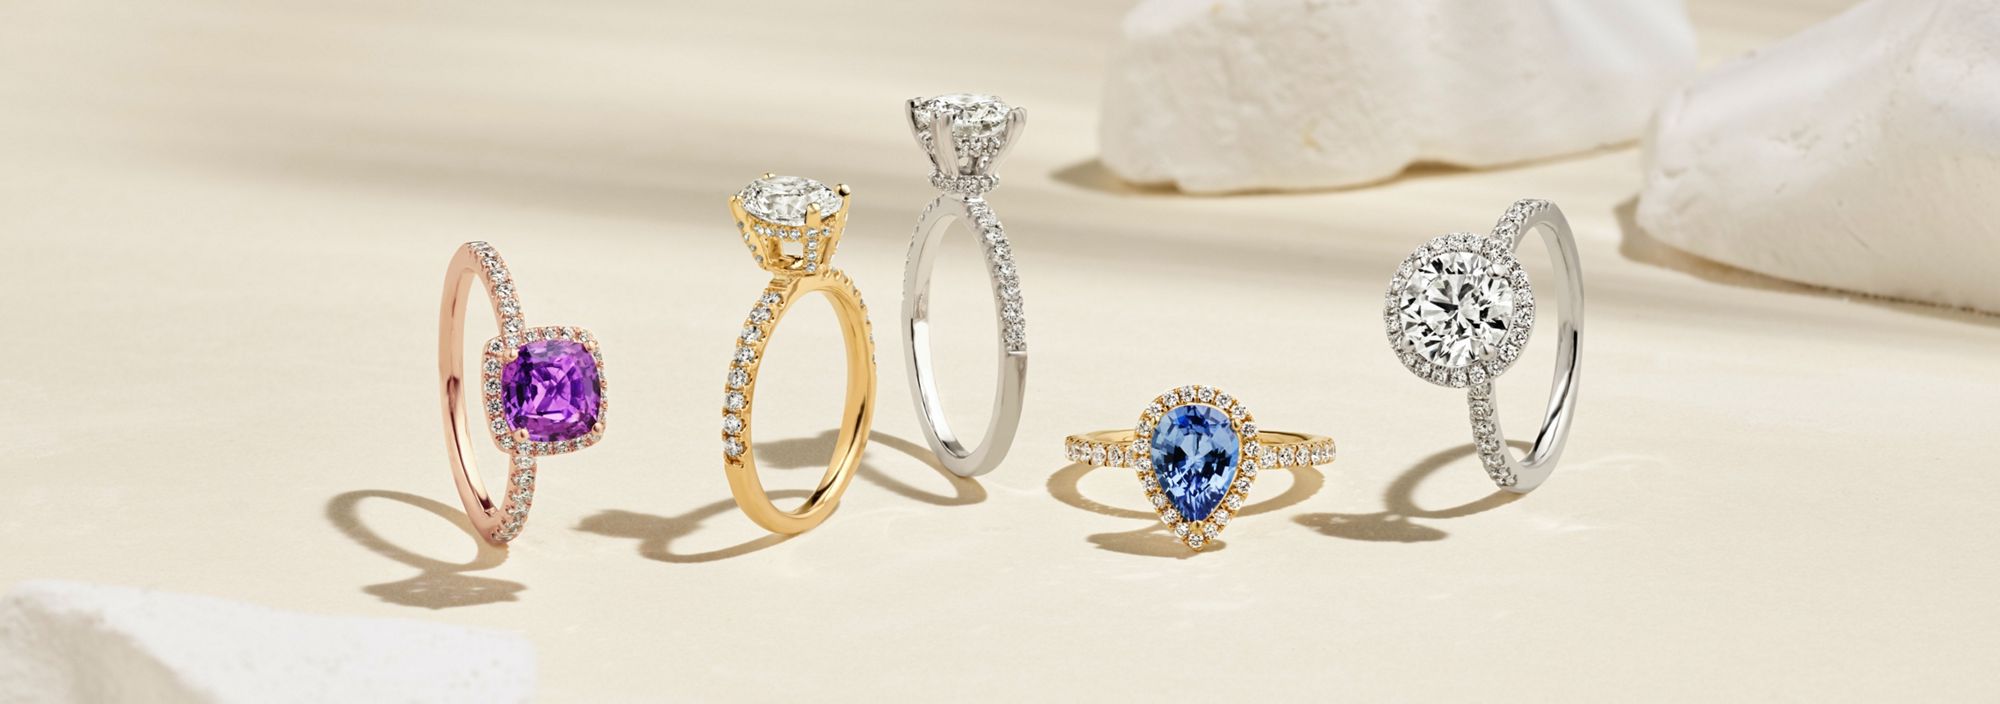 Desktop image of a collection of engagement ring styles